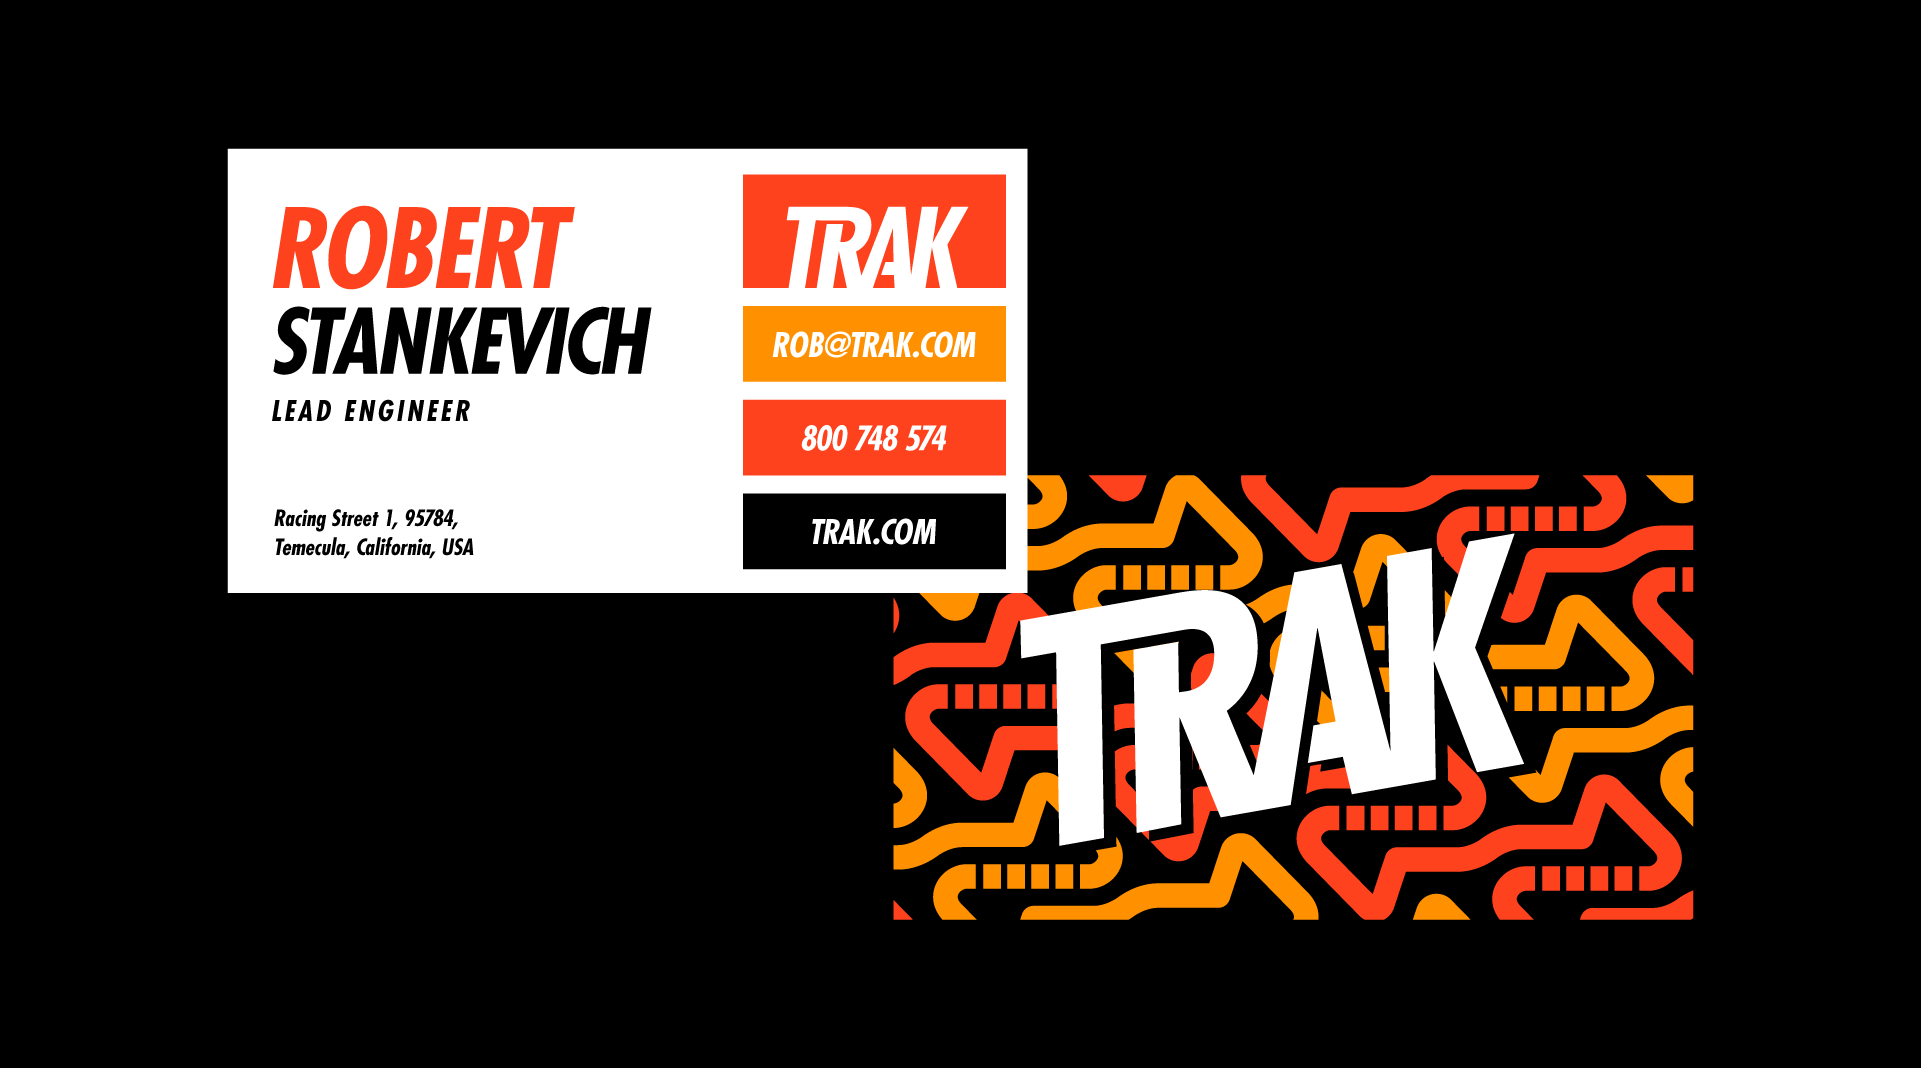 business cards for TRAK racing circuit from the USA